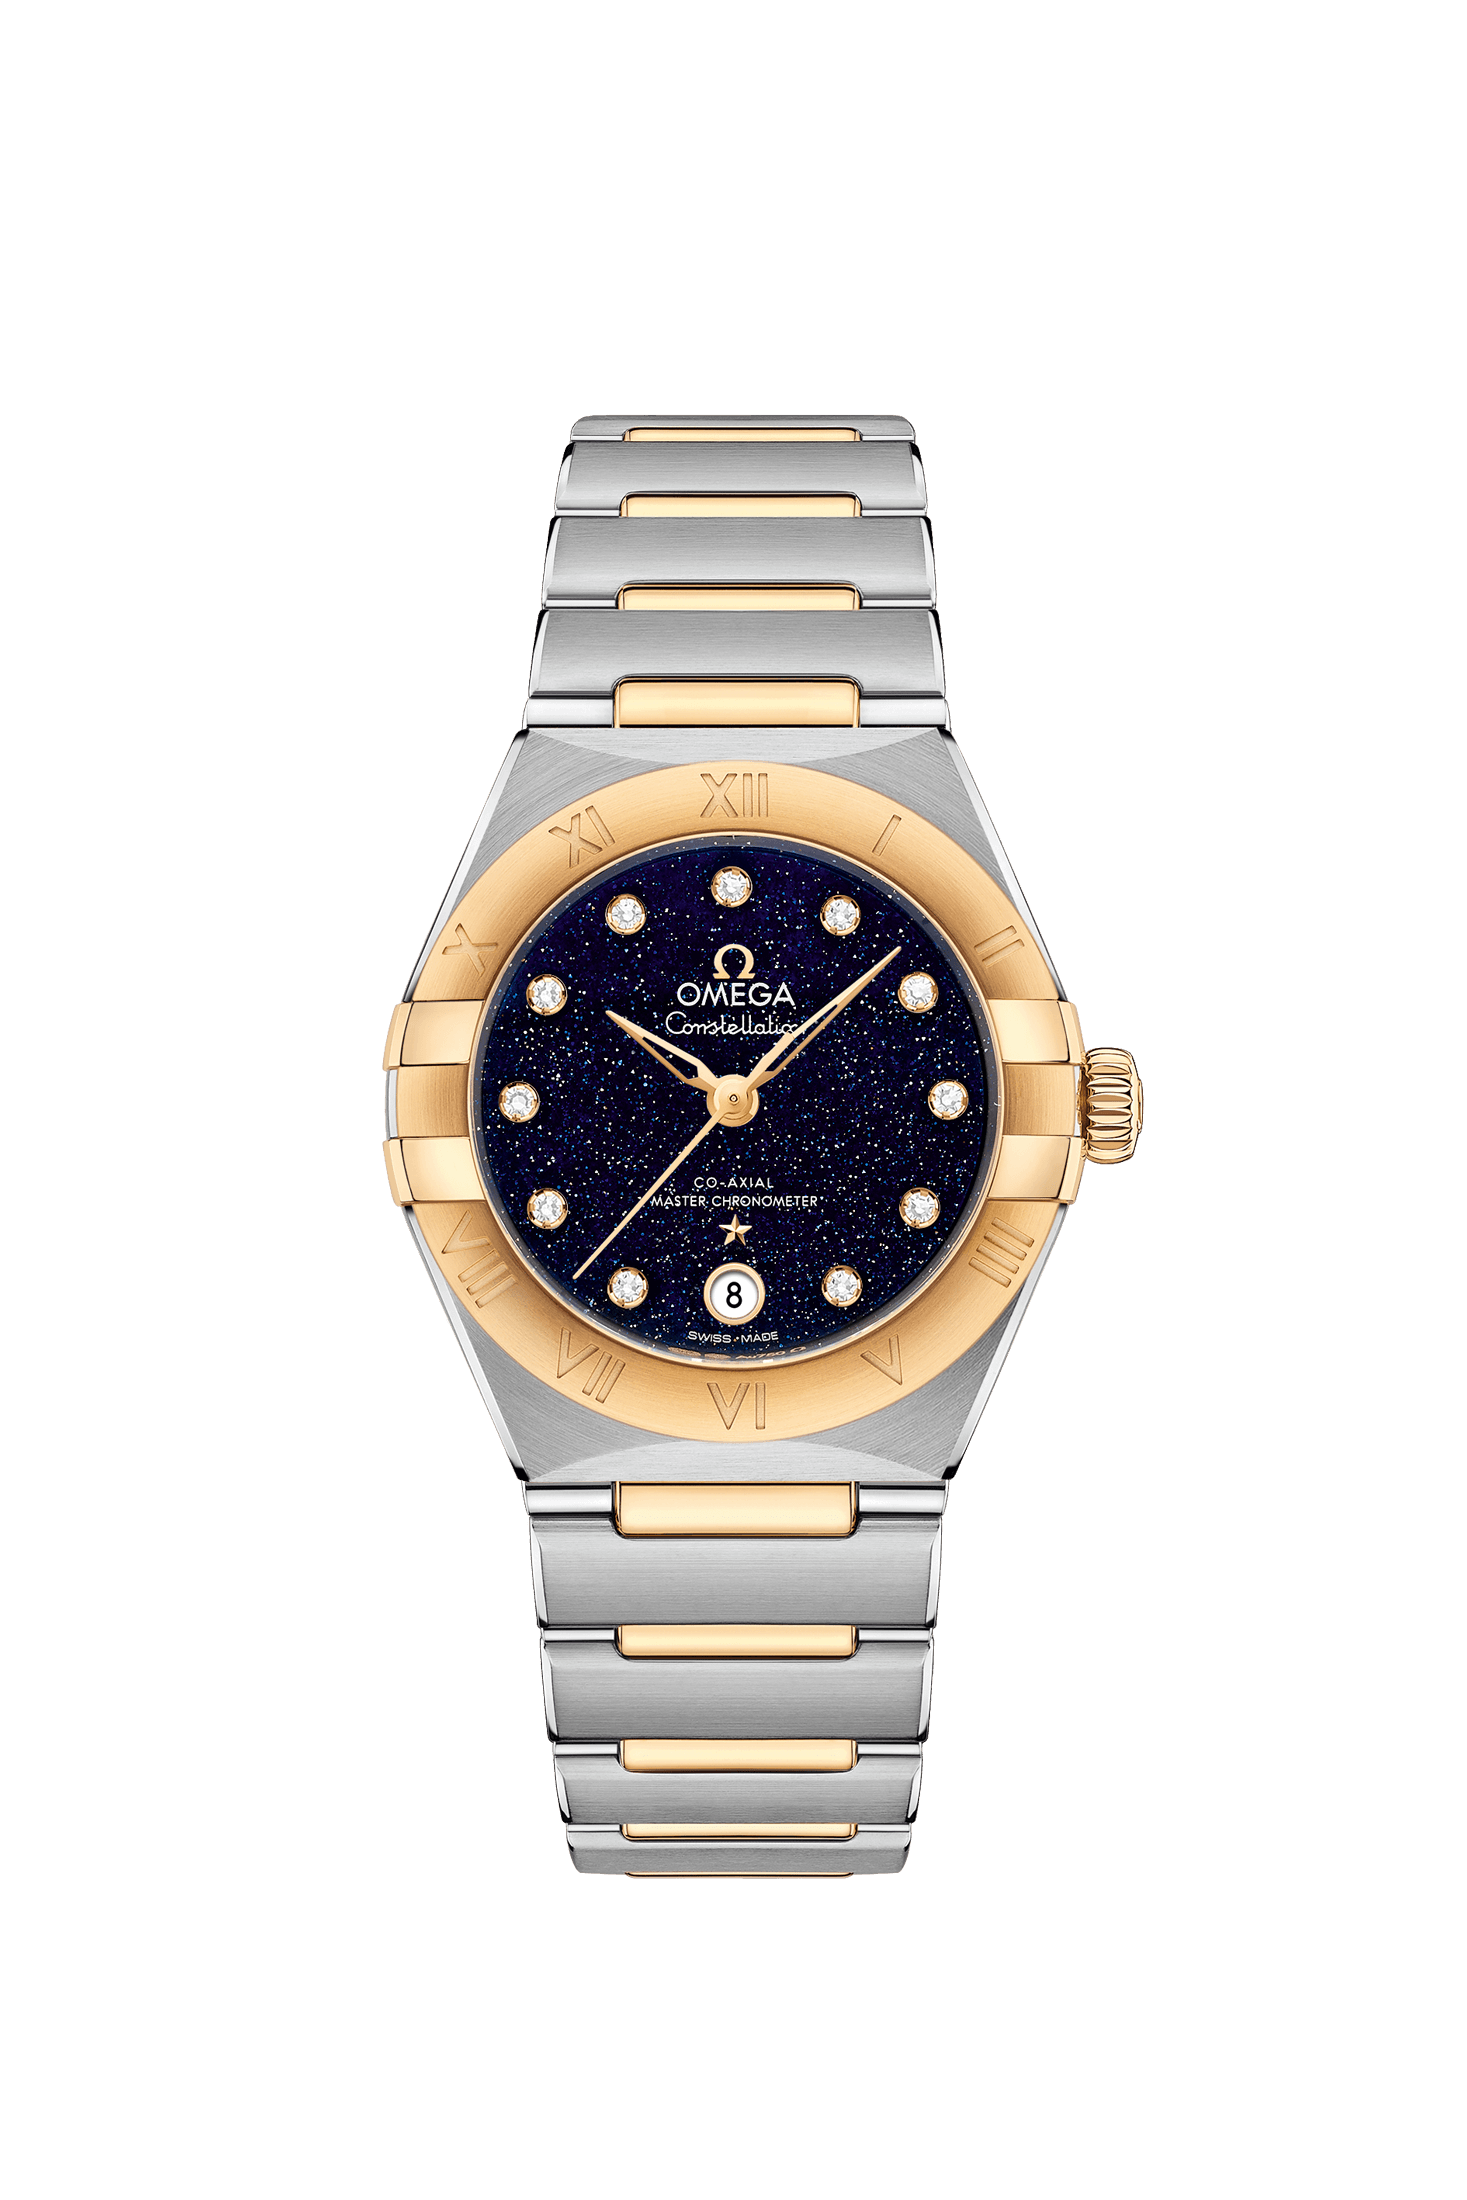 Ladies' watch  OMEGA, Constellation Co Axial Master Chronometer / 29mm, SKU: 131.20.29.20.53.001 | watchapproach.com